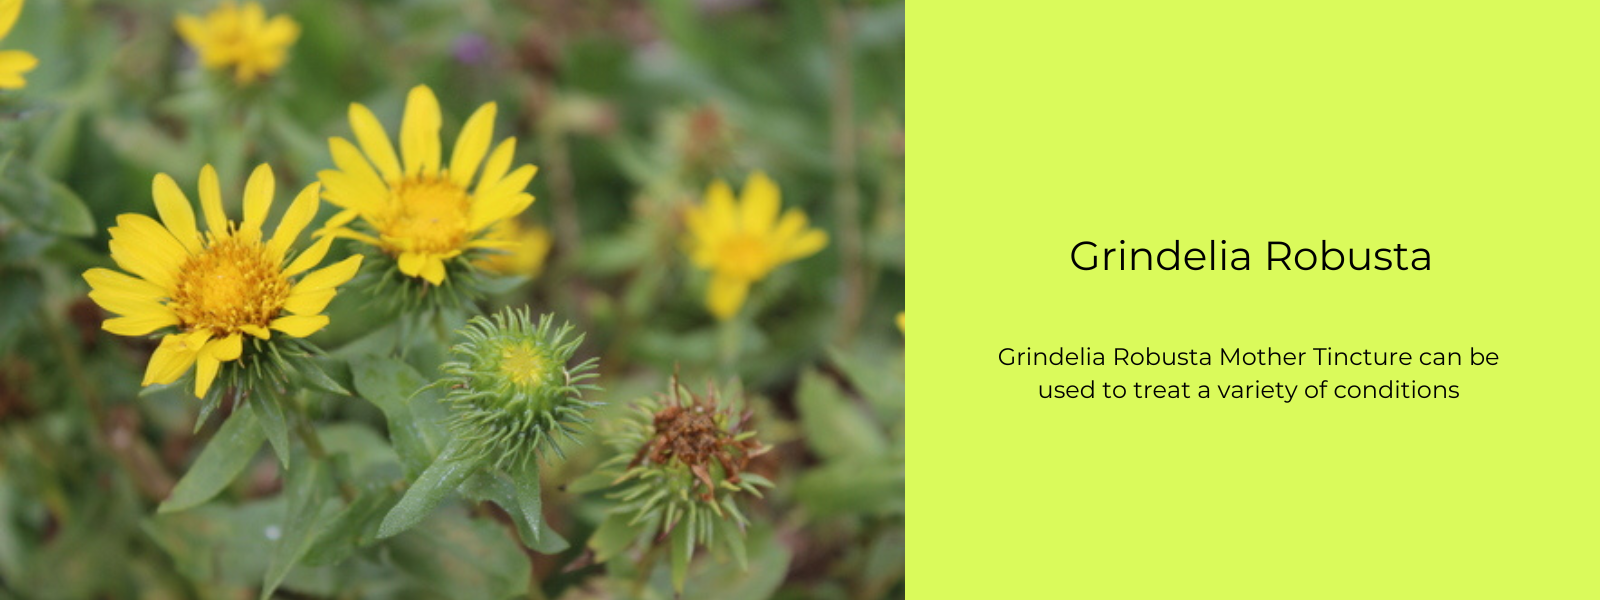 Grindelia Robusta - Health Benefits, Uses and Important Facts